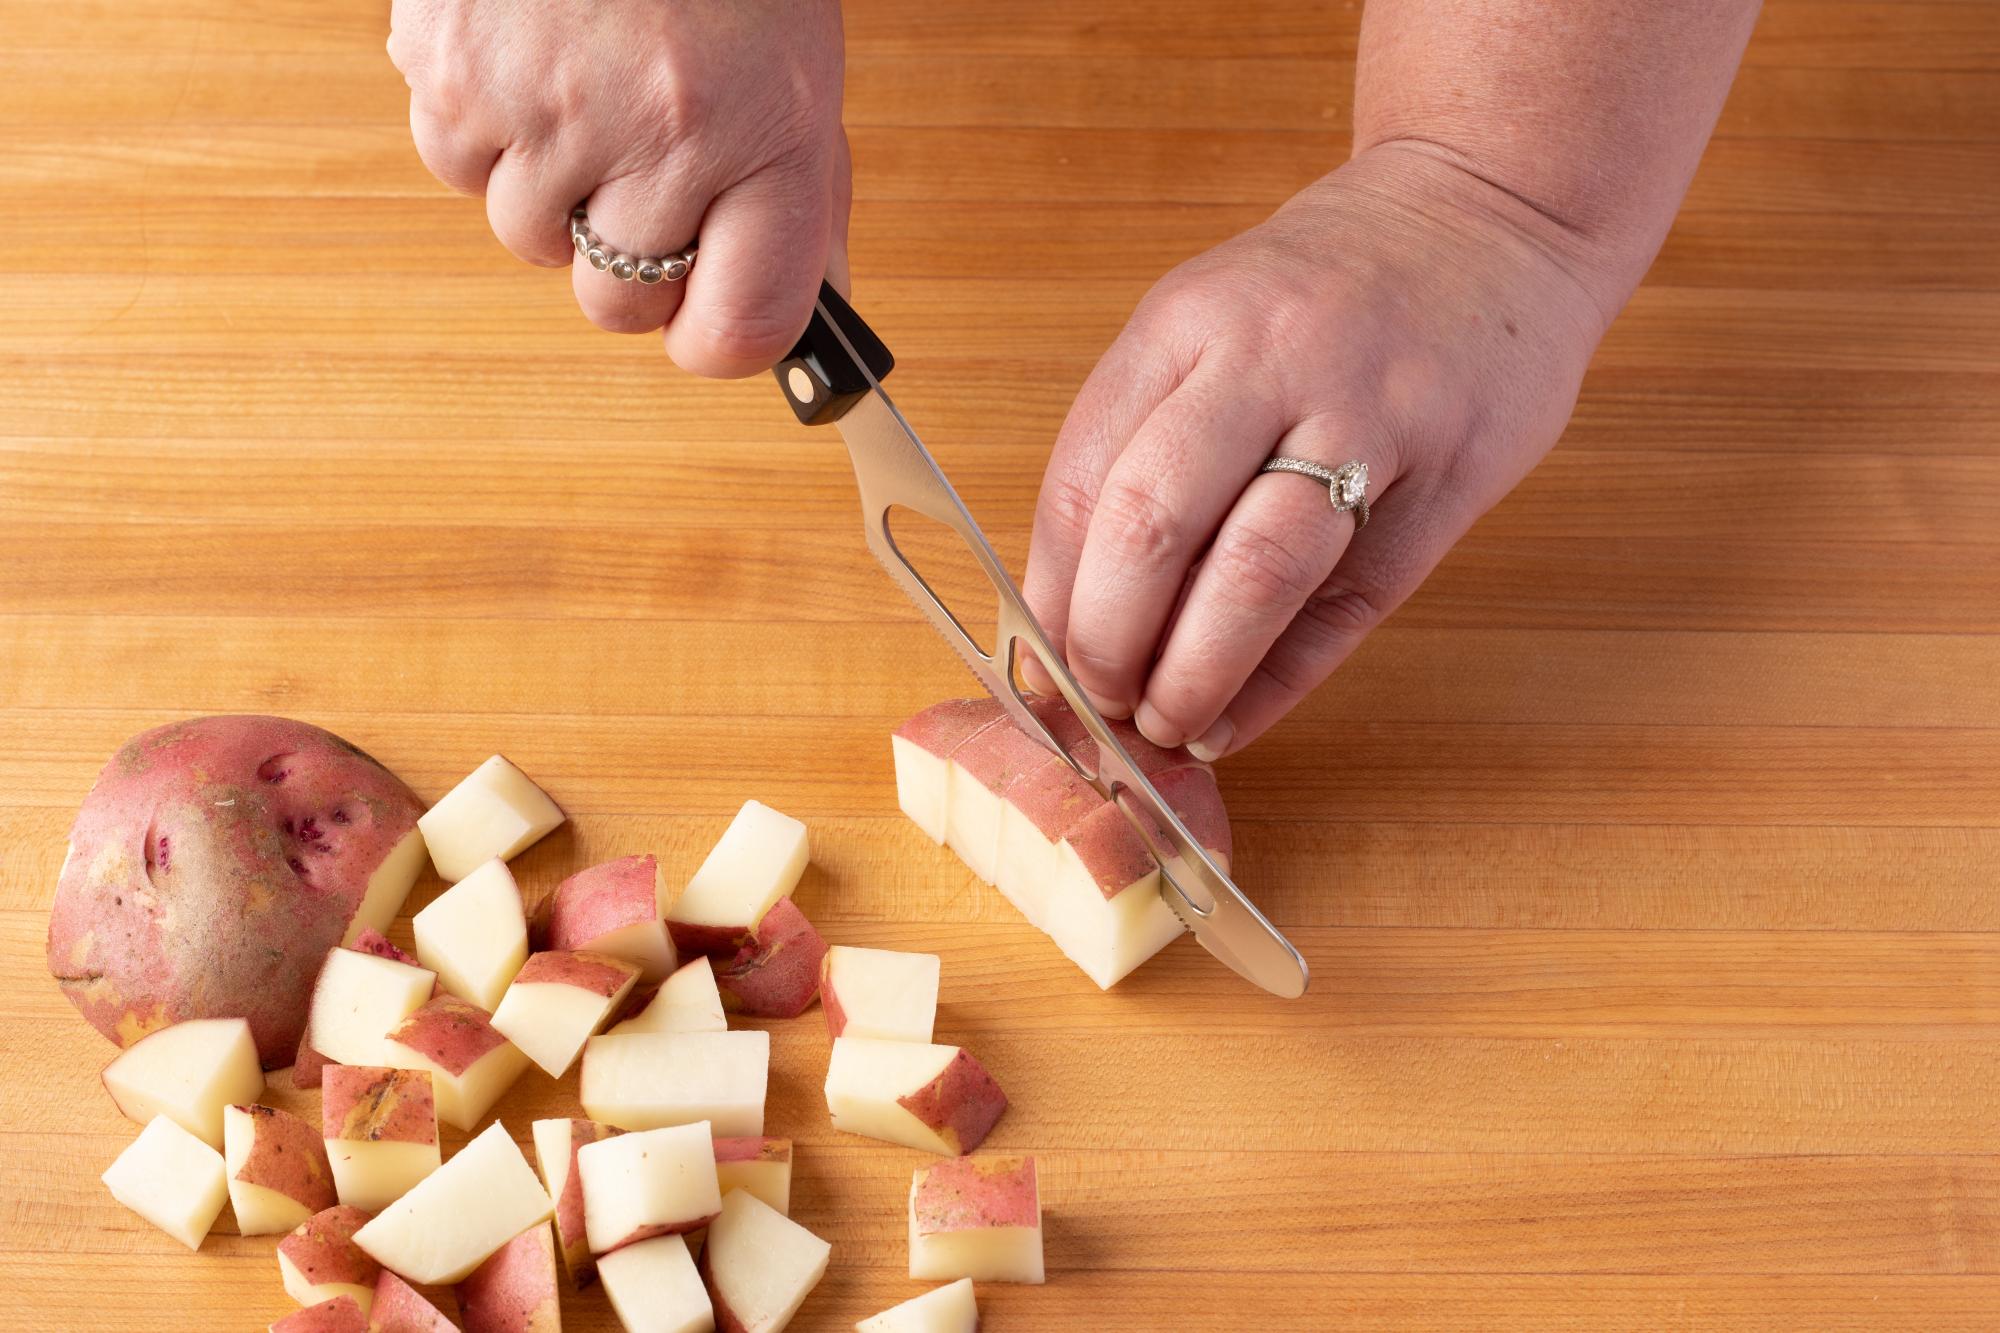 Chop the red potatoes with a Traditional Cheese Knife.